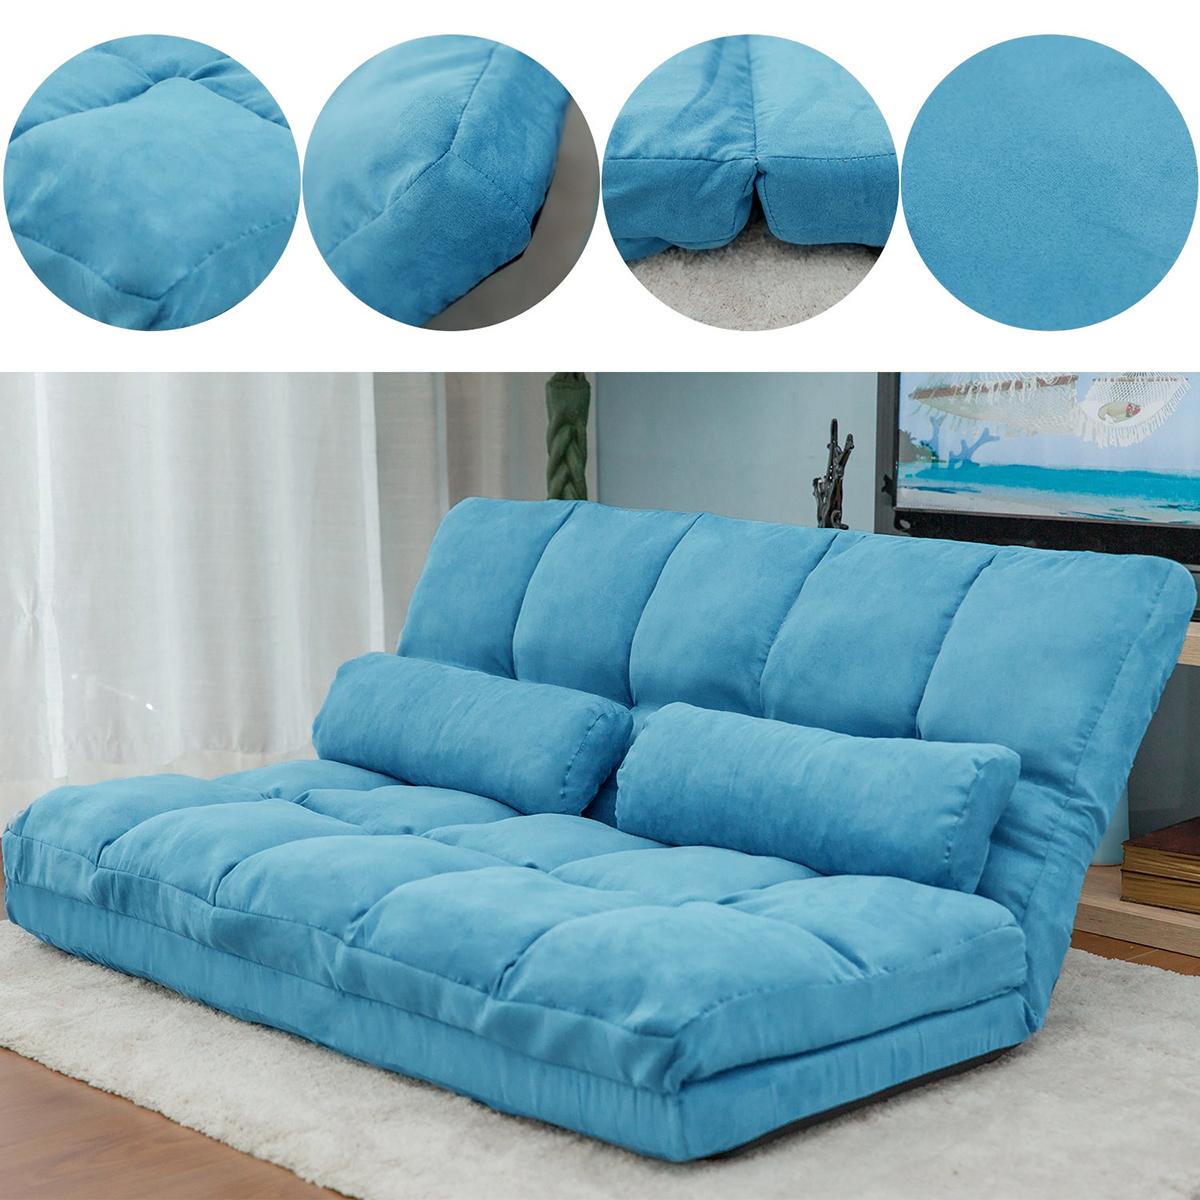 Fold Down Sofa Bed Lazy Sofa Floor Couch Adjustable Folding Modern Futon Chaise Video Gaming Lounge Convertible Upholstered Memory Foam Padded Cushion Guest Sleeper Chair with Two Pillows, Blue - image 3 of 7